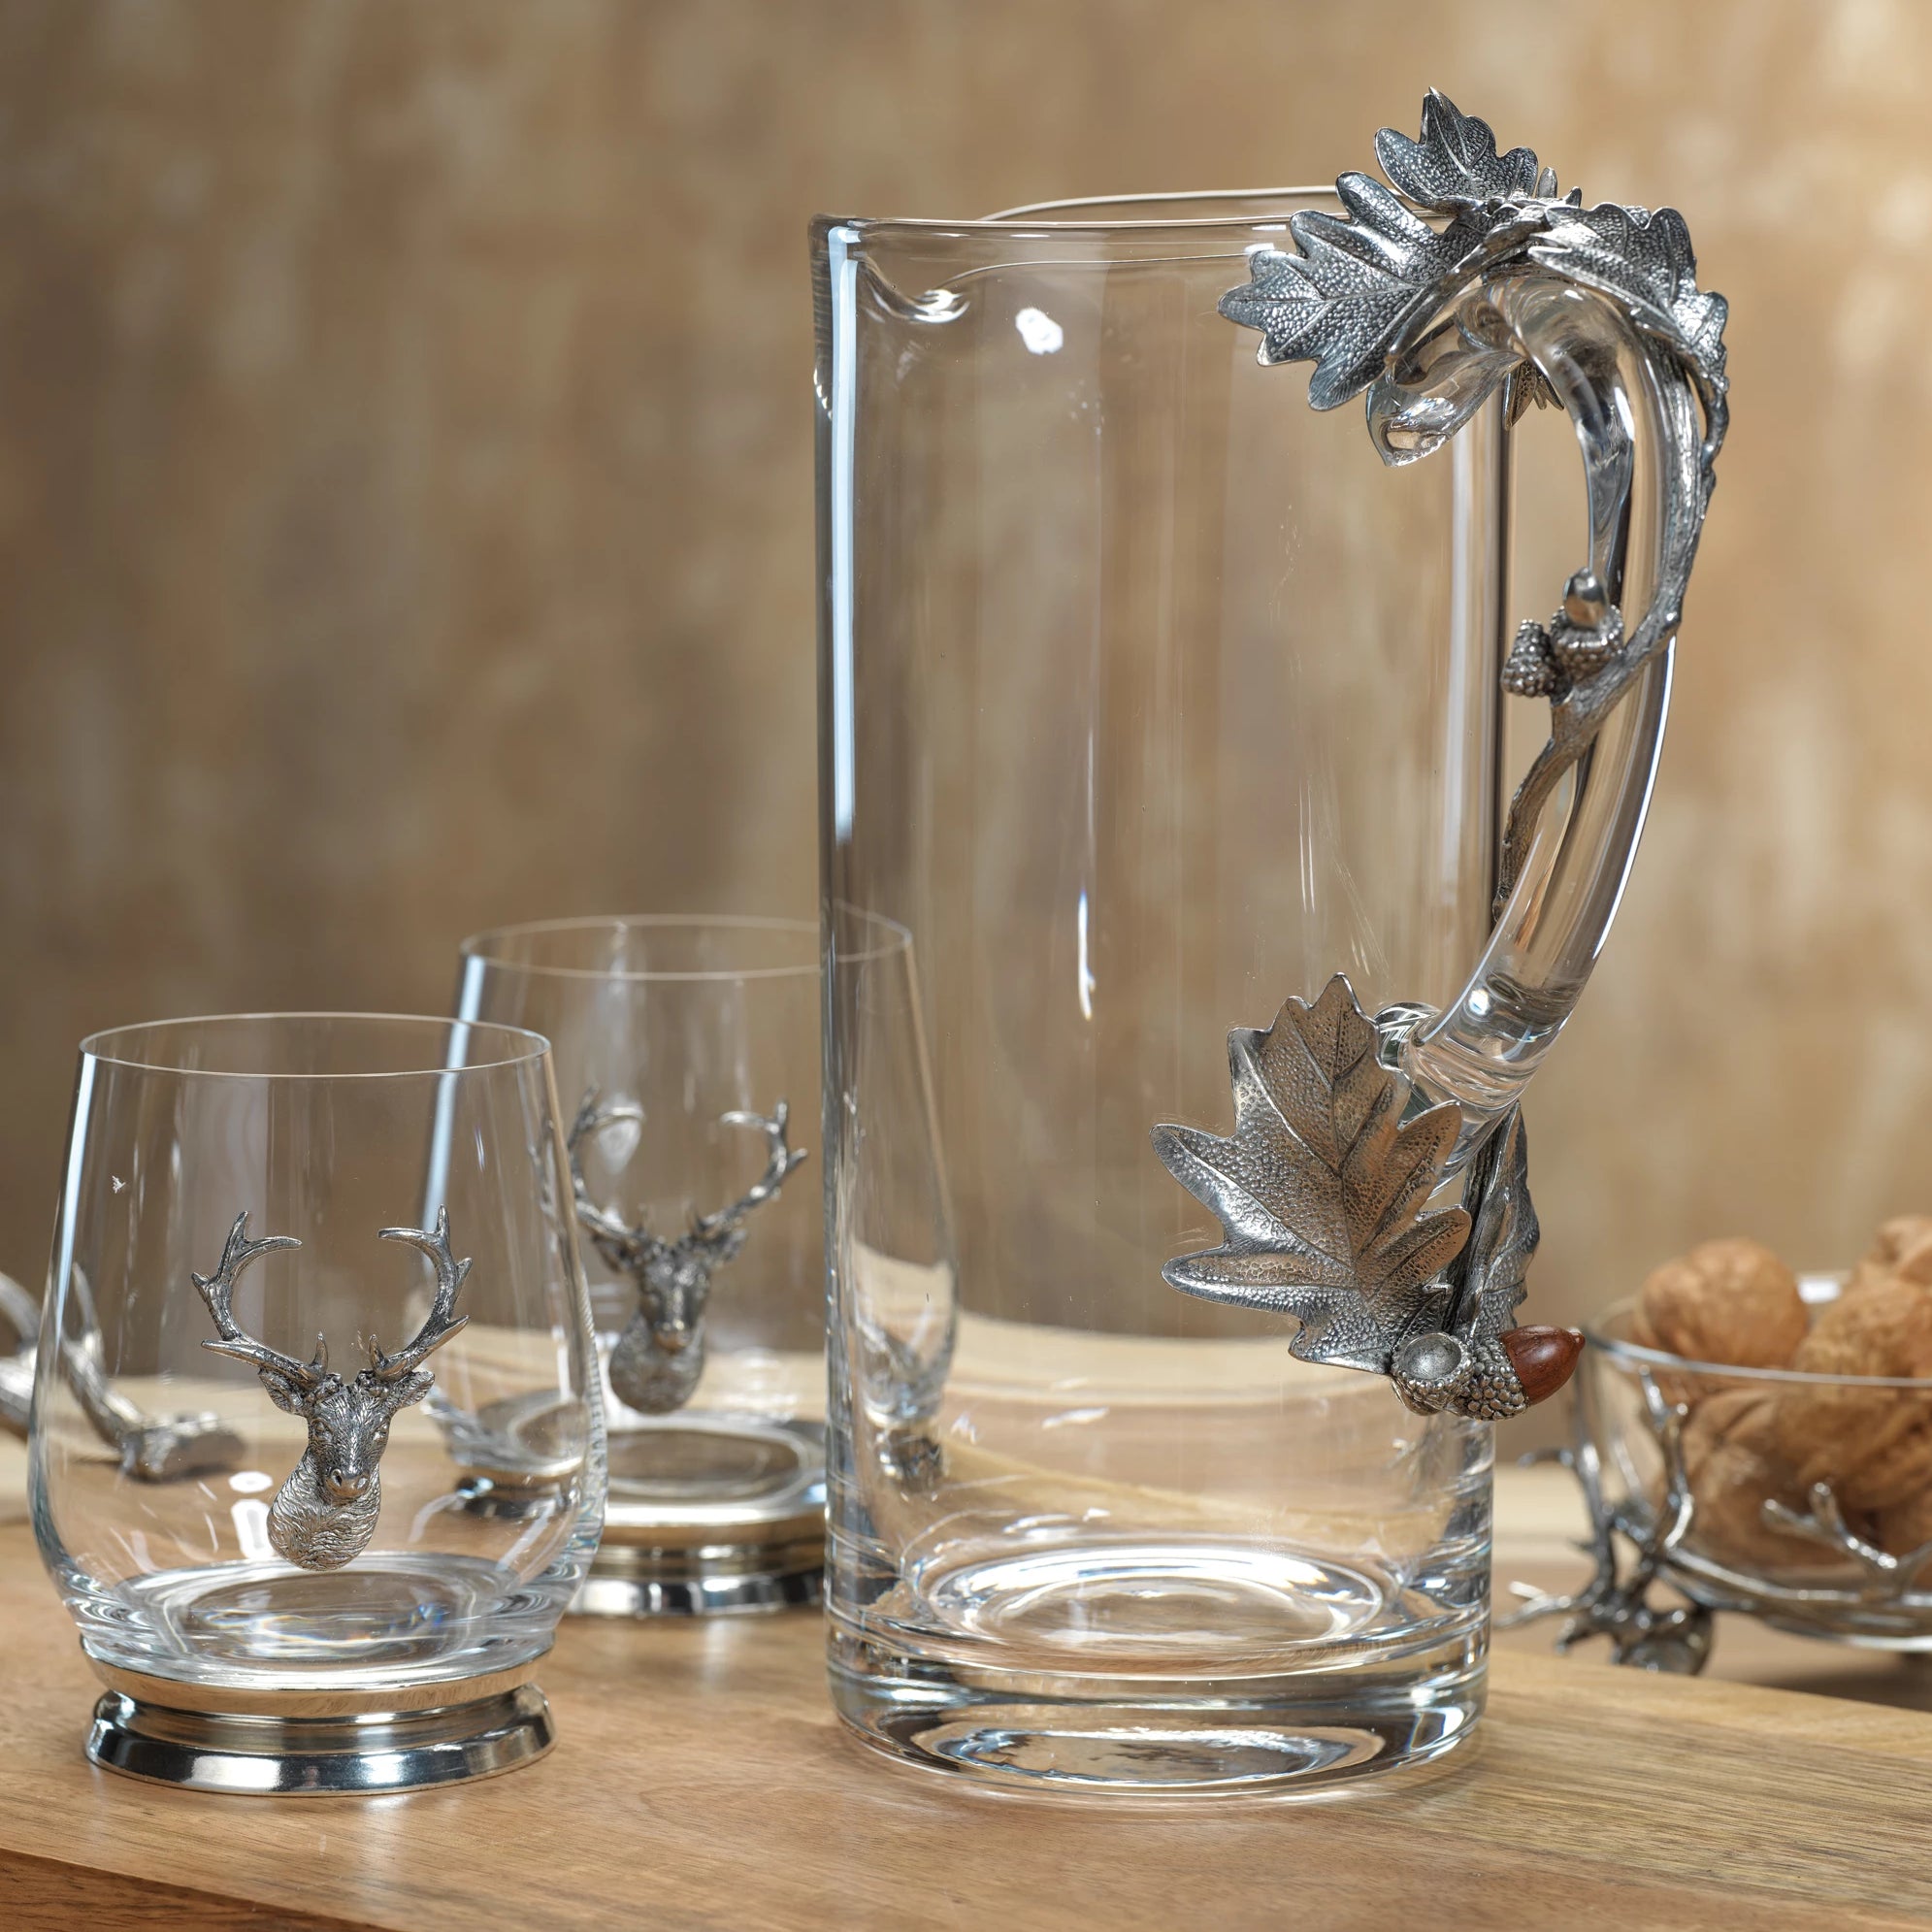 St. Anton Pewter and Glass Pitcher and Tumblers - CARLYLE AVENUE